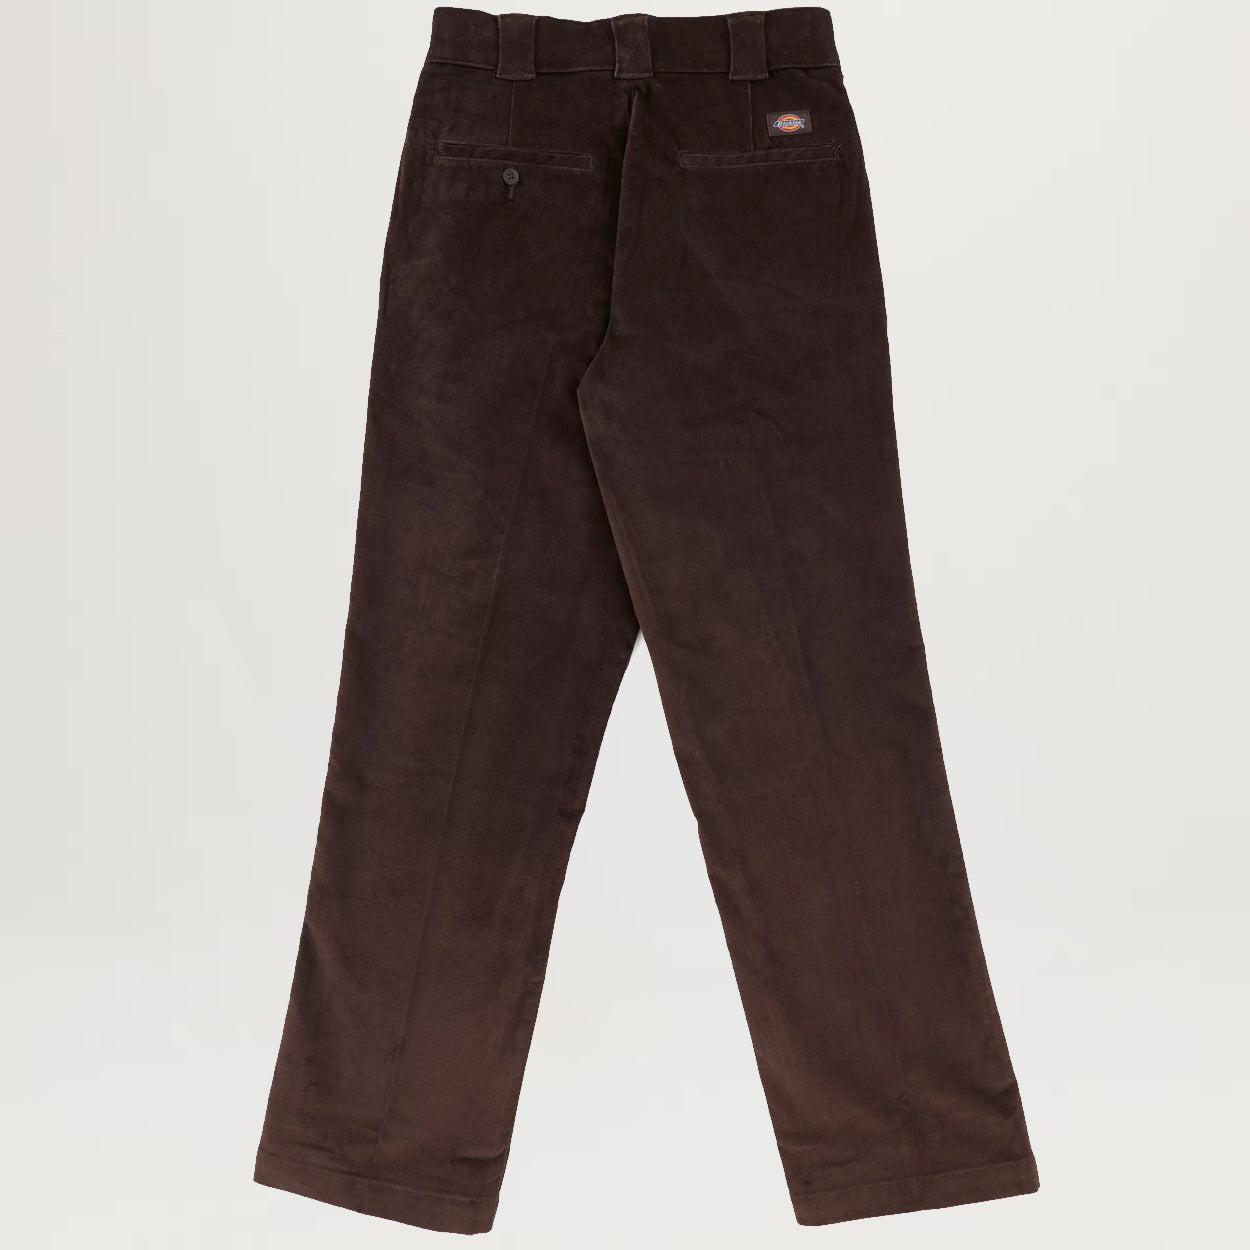 High Rise Vintage Slim Corduroy Pants with Washwell | Gap Factory